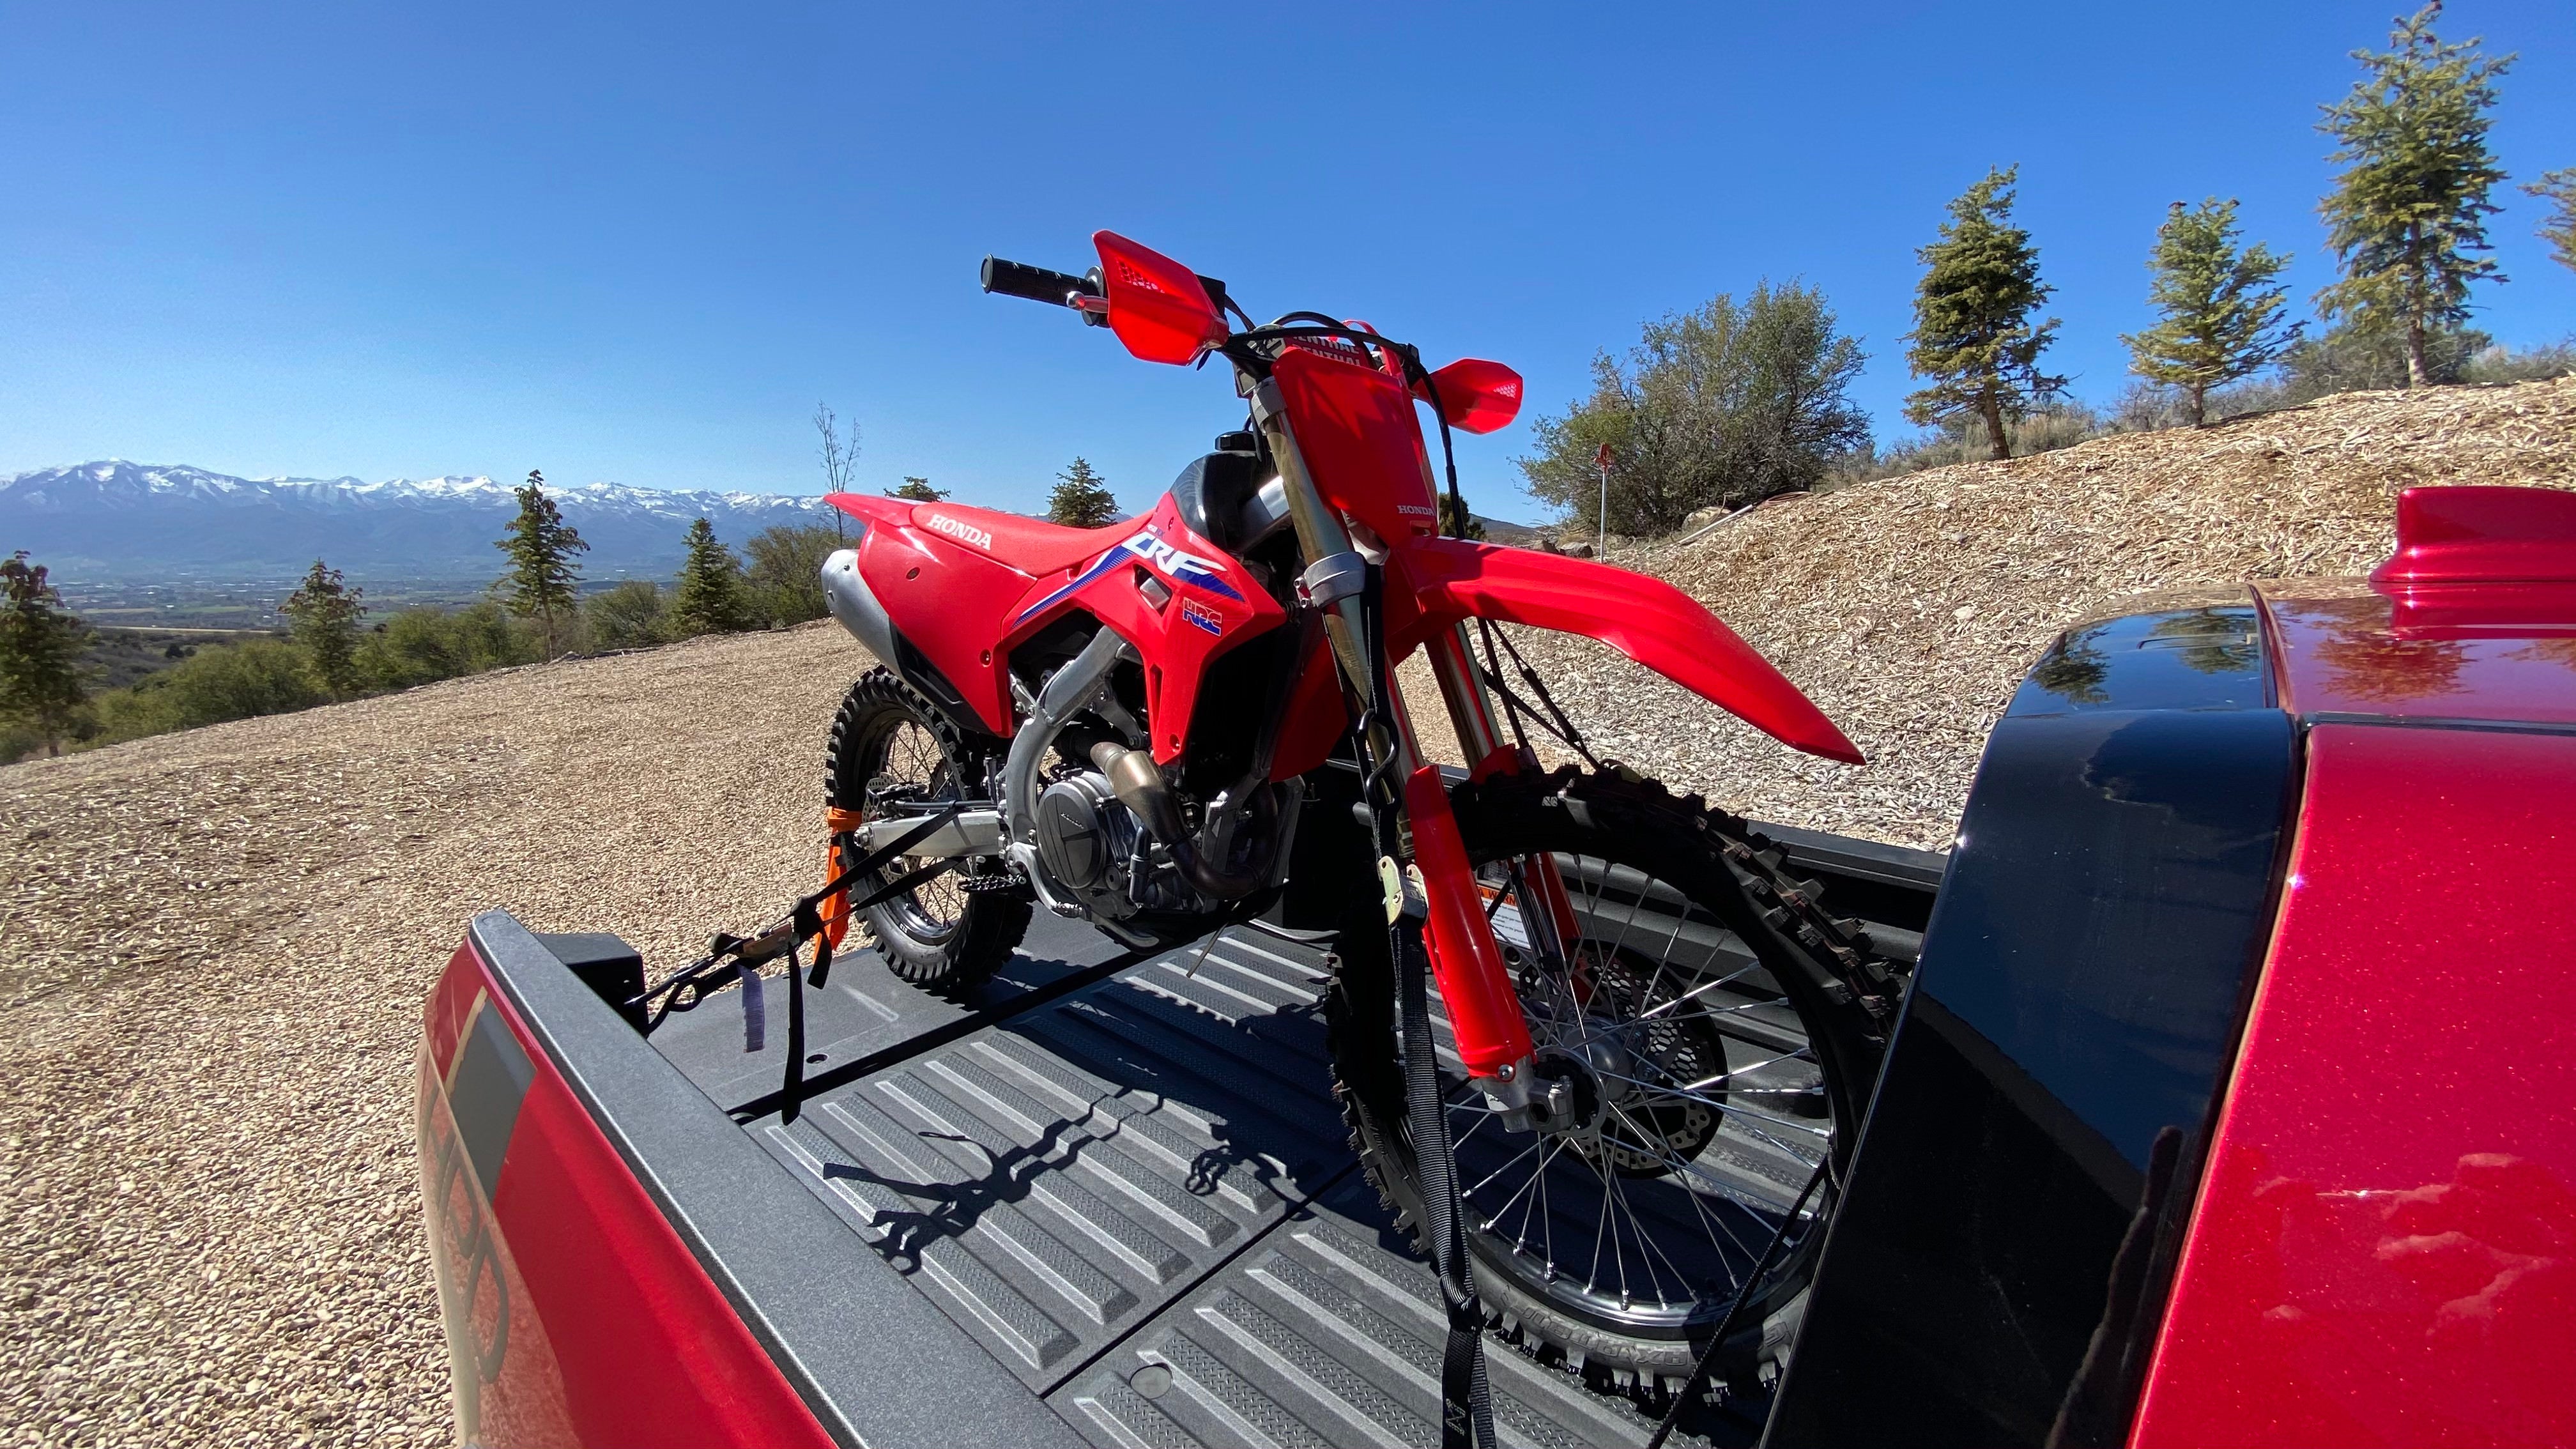 A closeup shot of the CRF450RX in the pickup